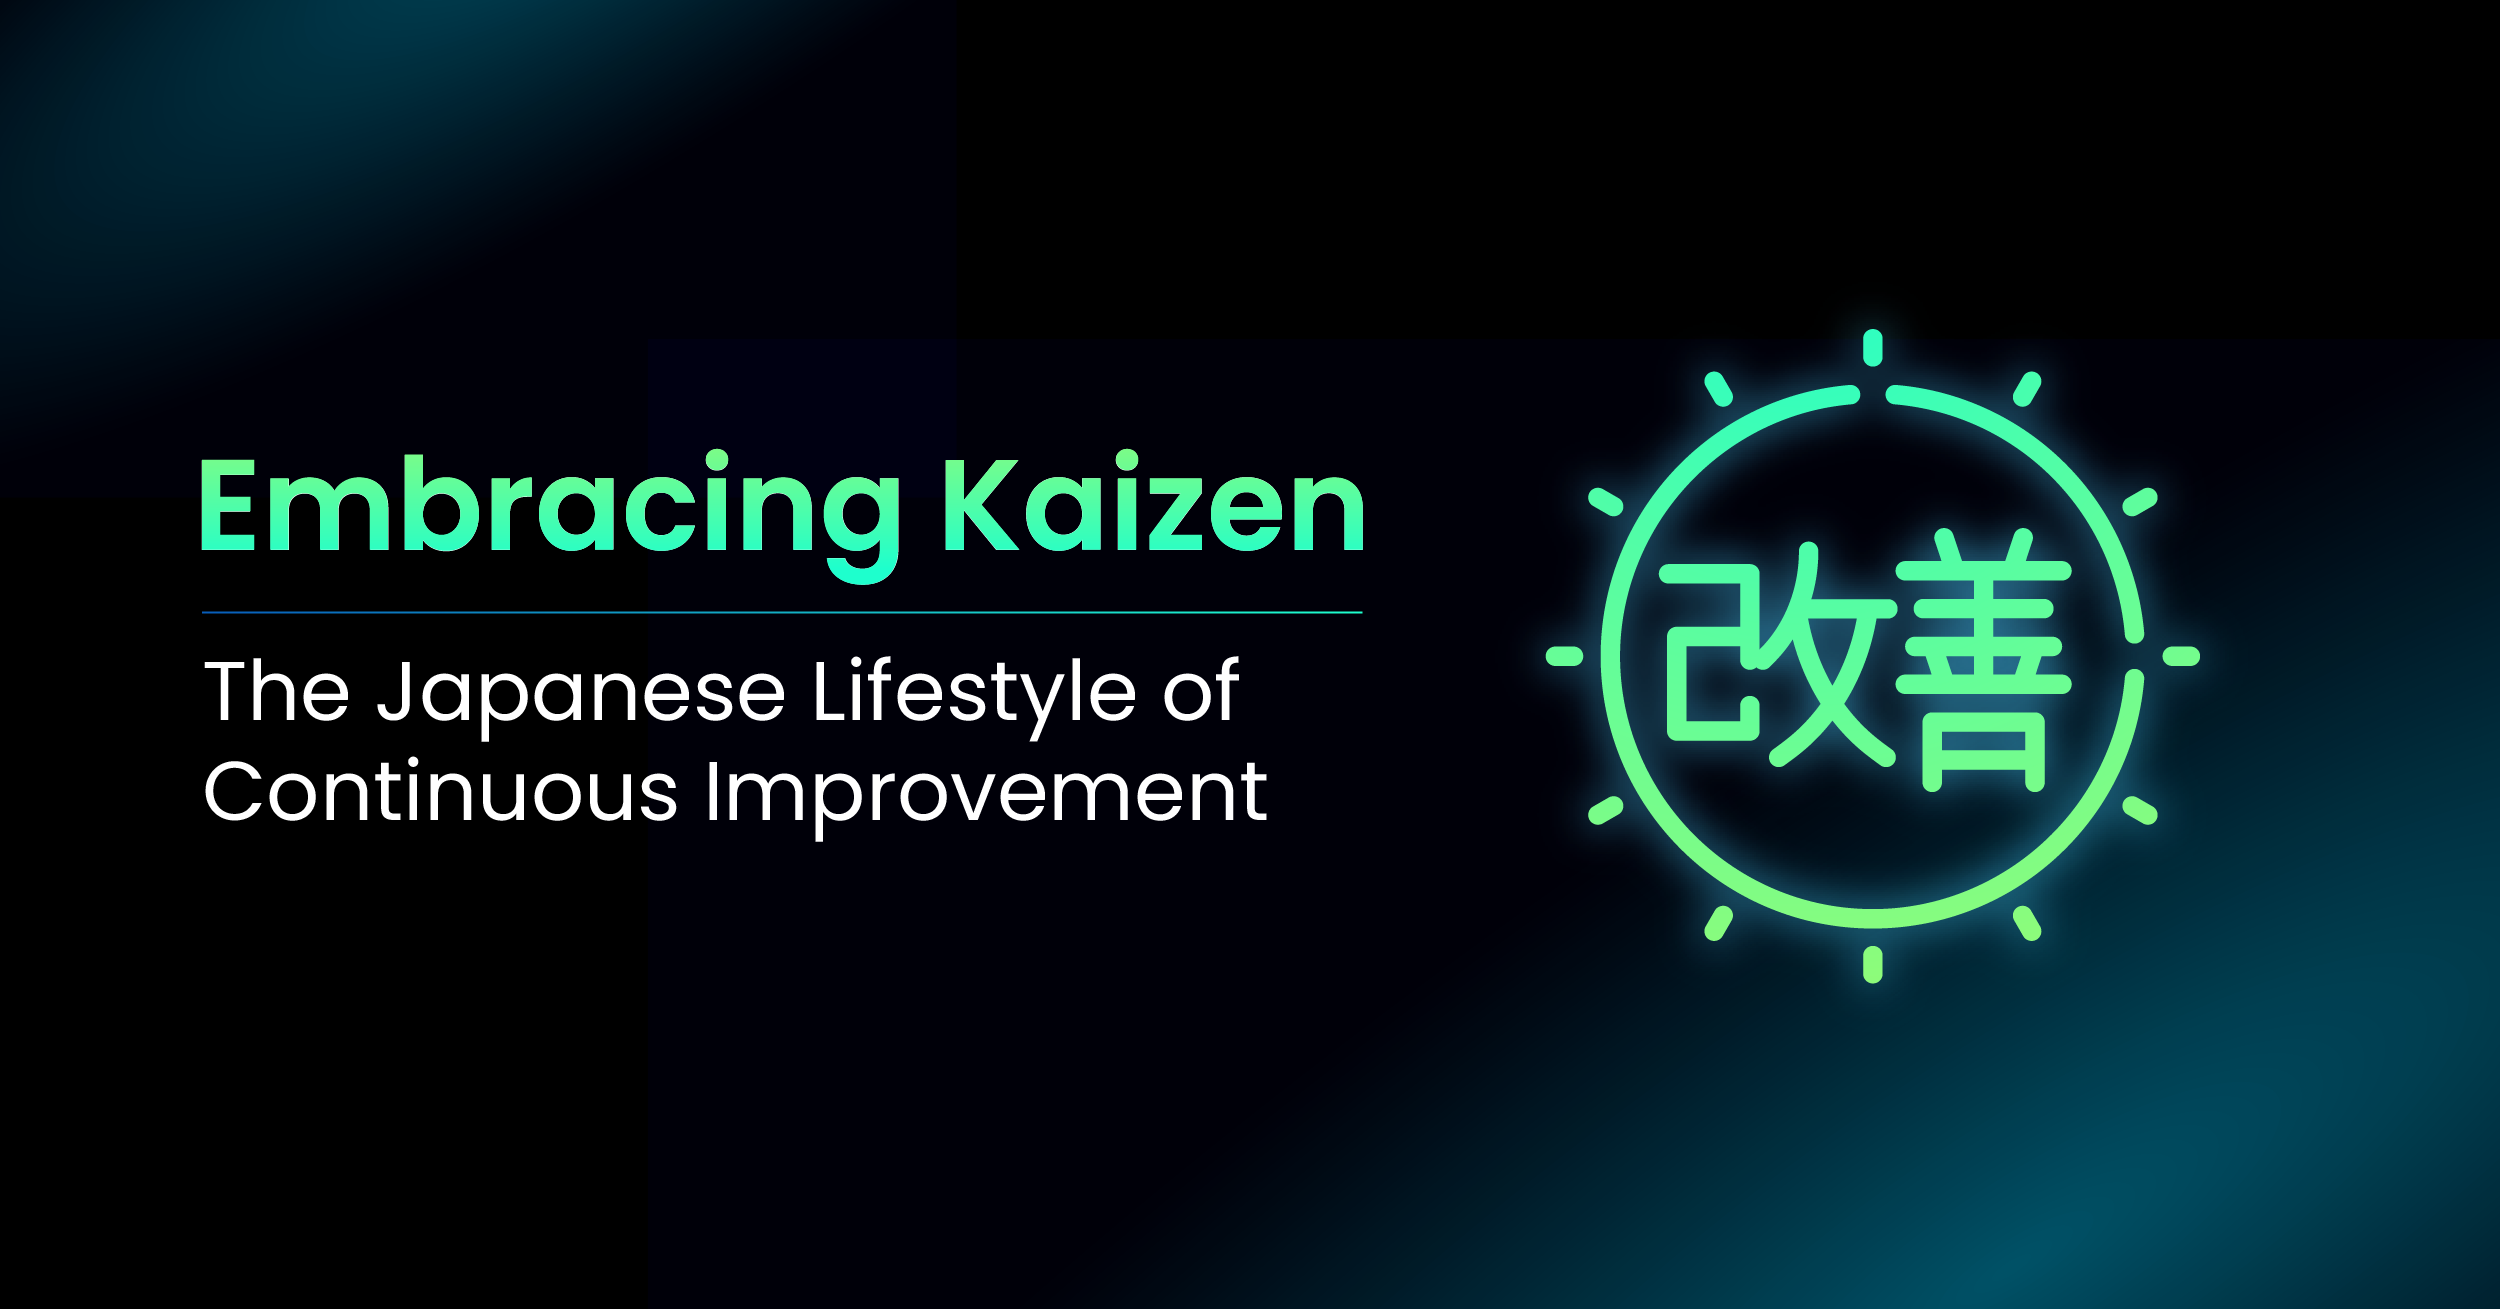 Practical ways to incorporate Kaizen into your lifestyle